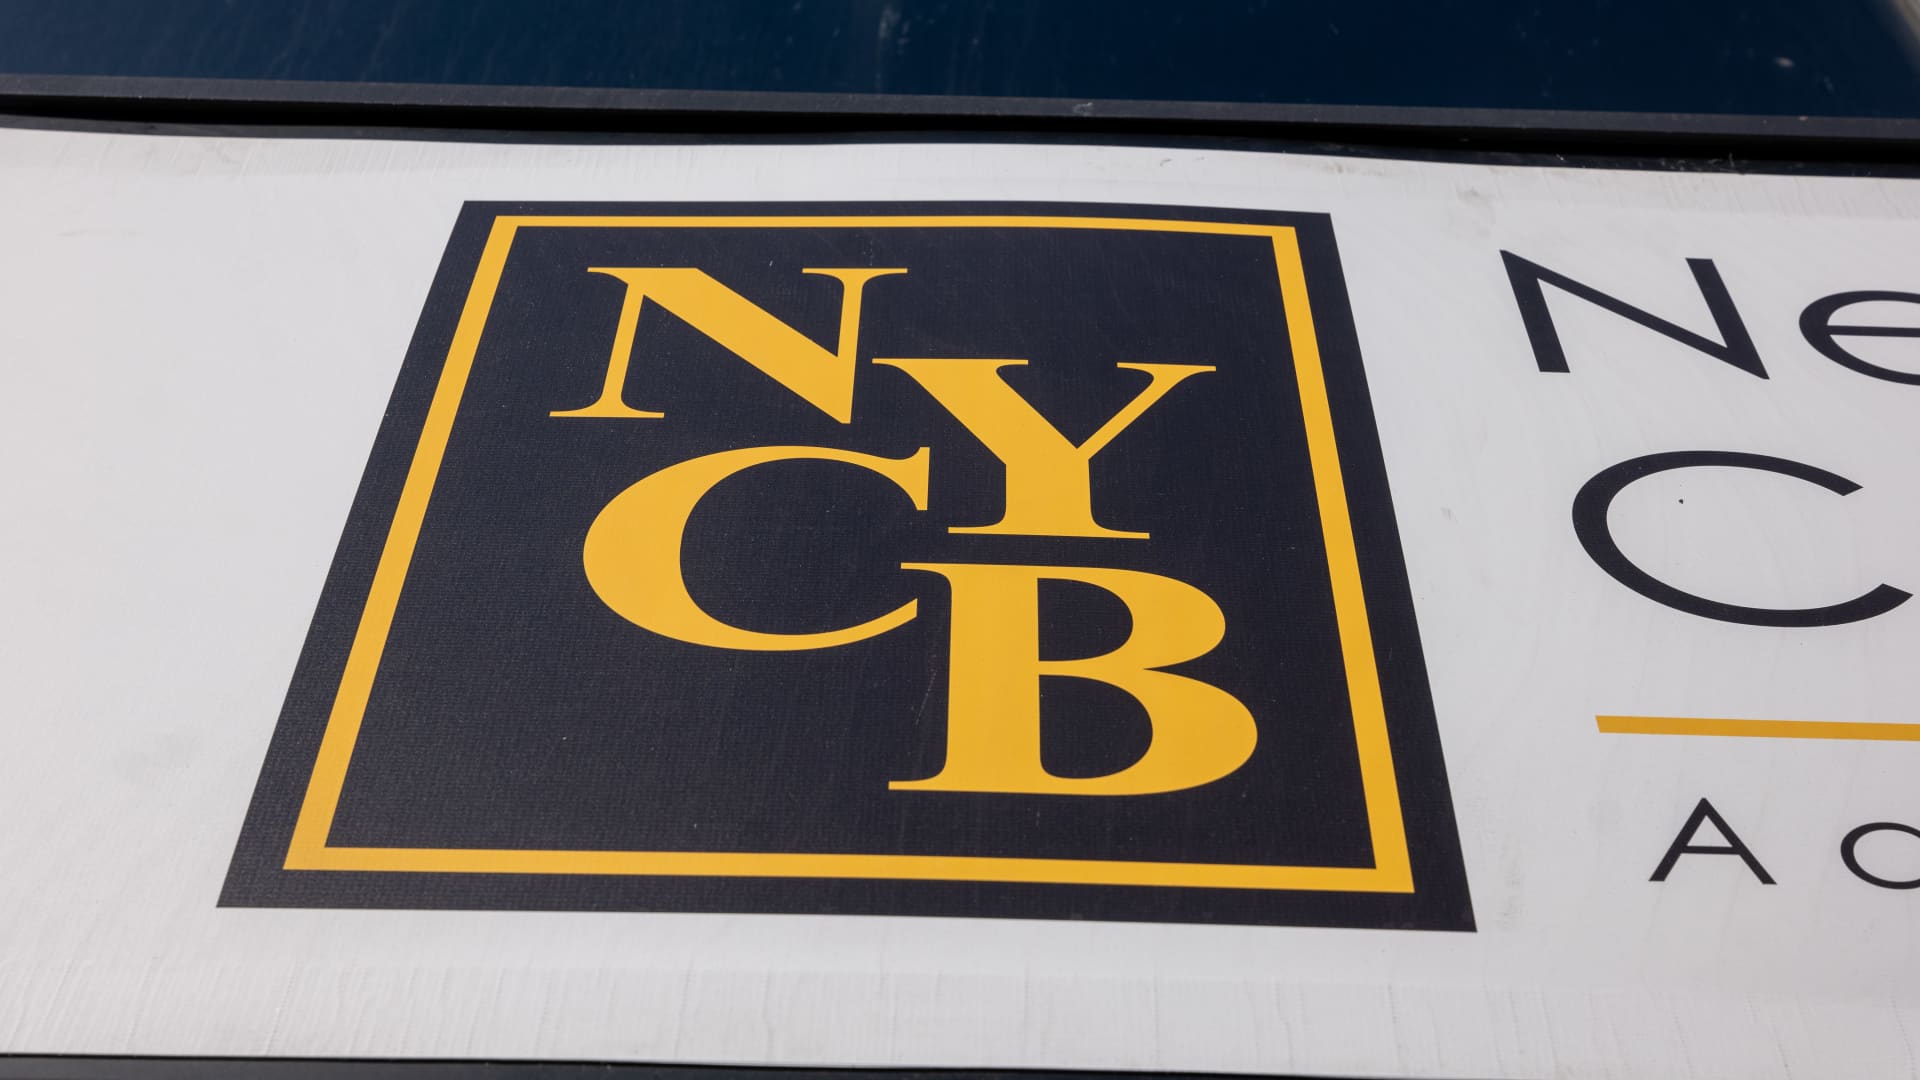 NYCB shares jump after new CEO gives two-year plan for "clear path to profitability"